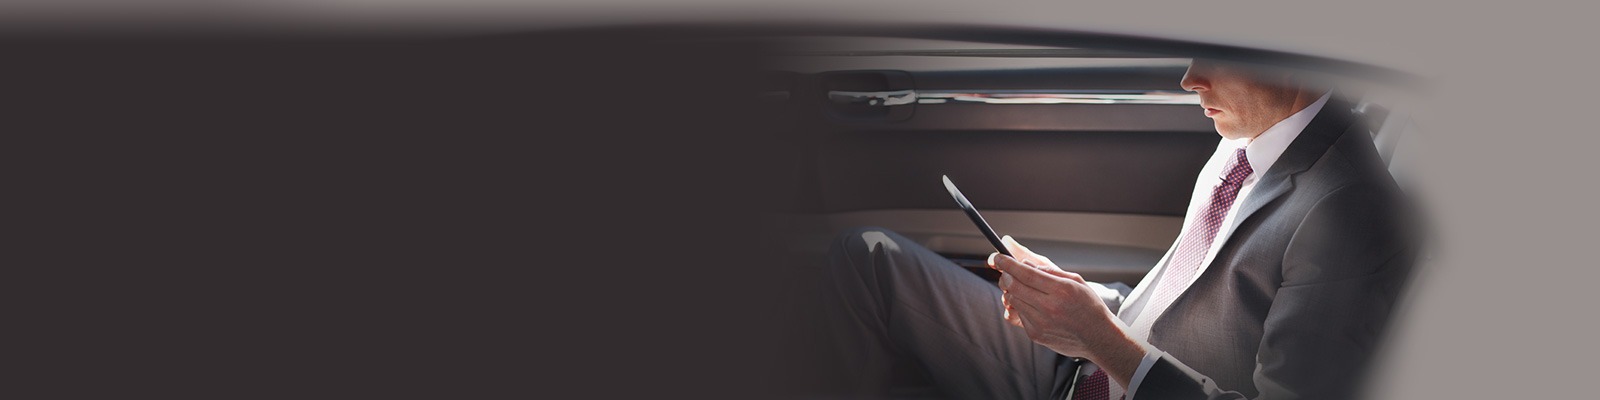 a man sits in a limo, checking on a tablet in his hands